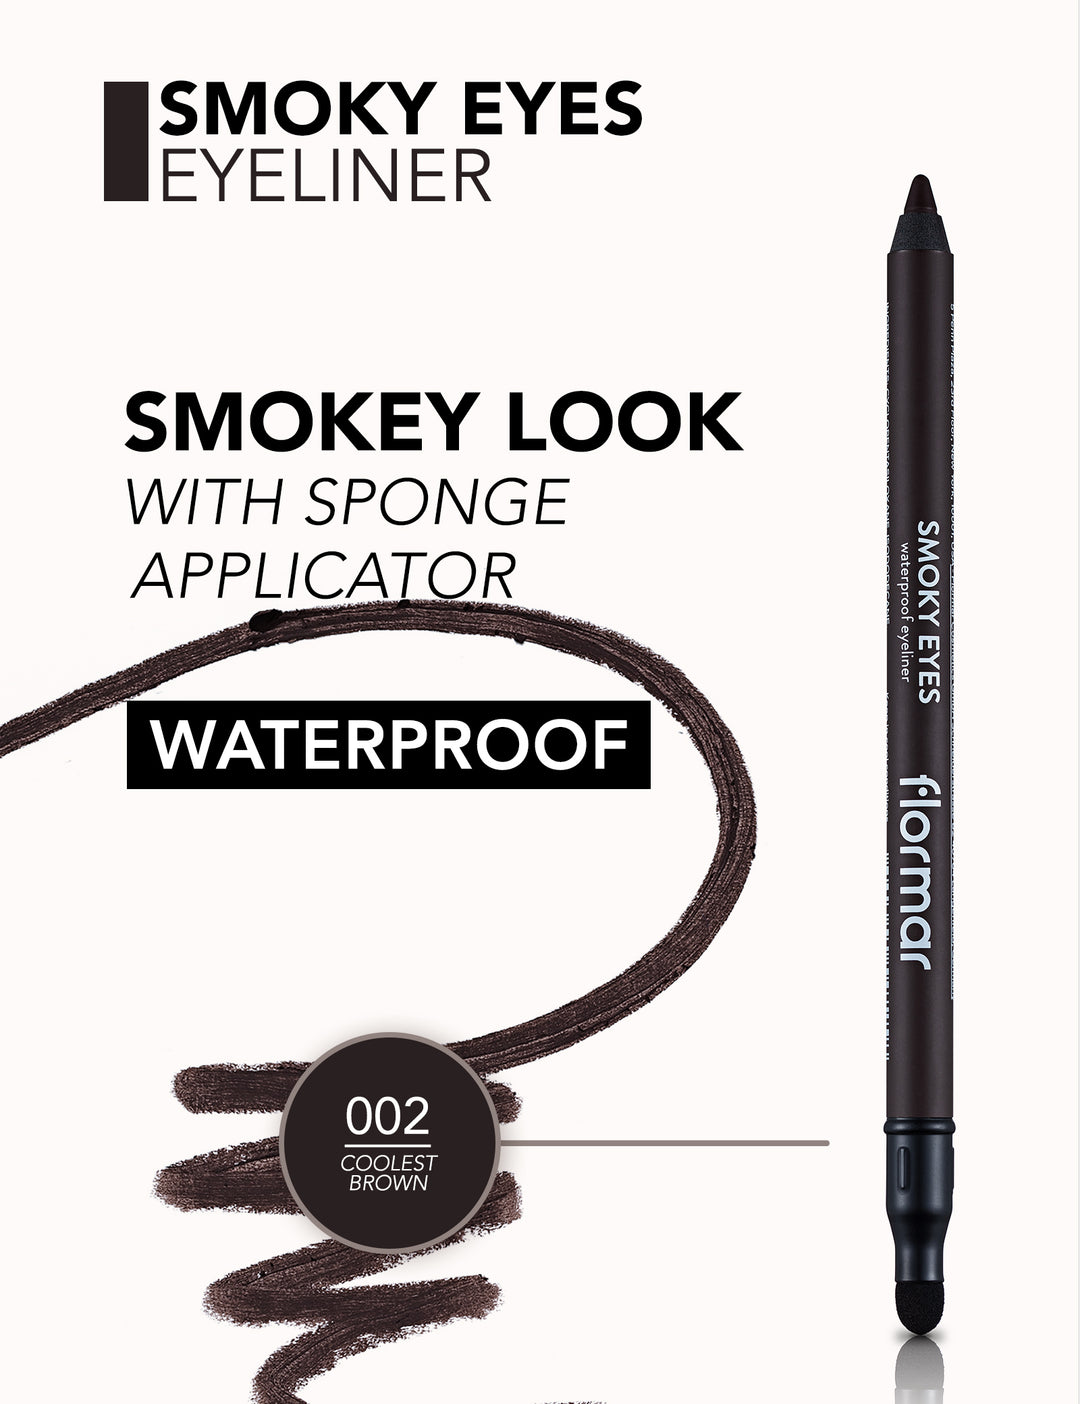 SMOKY FEYES UEL-002 COOLEST BROWN